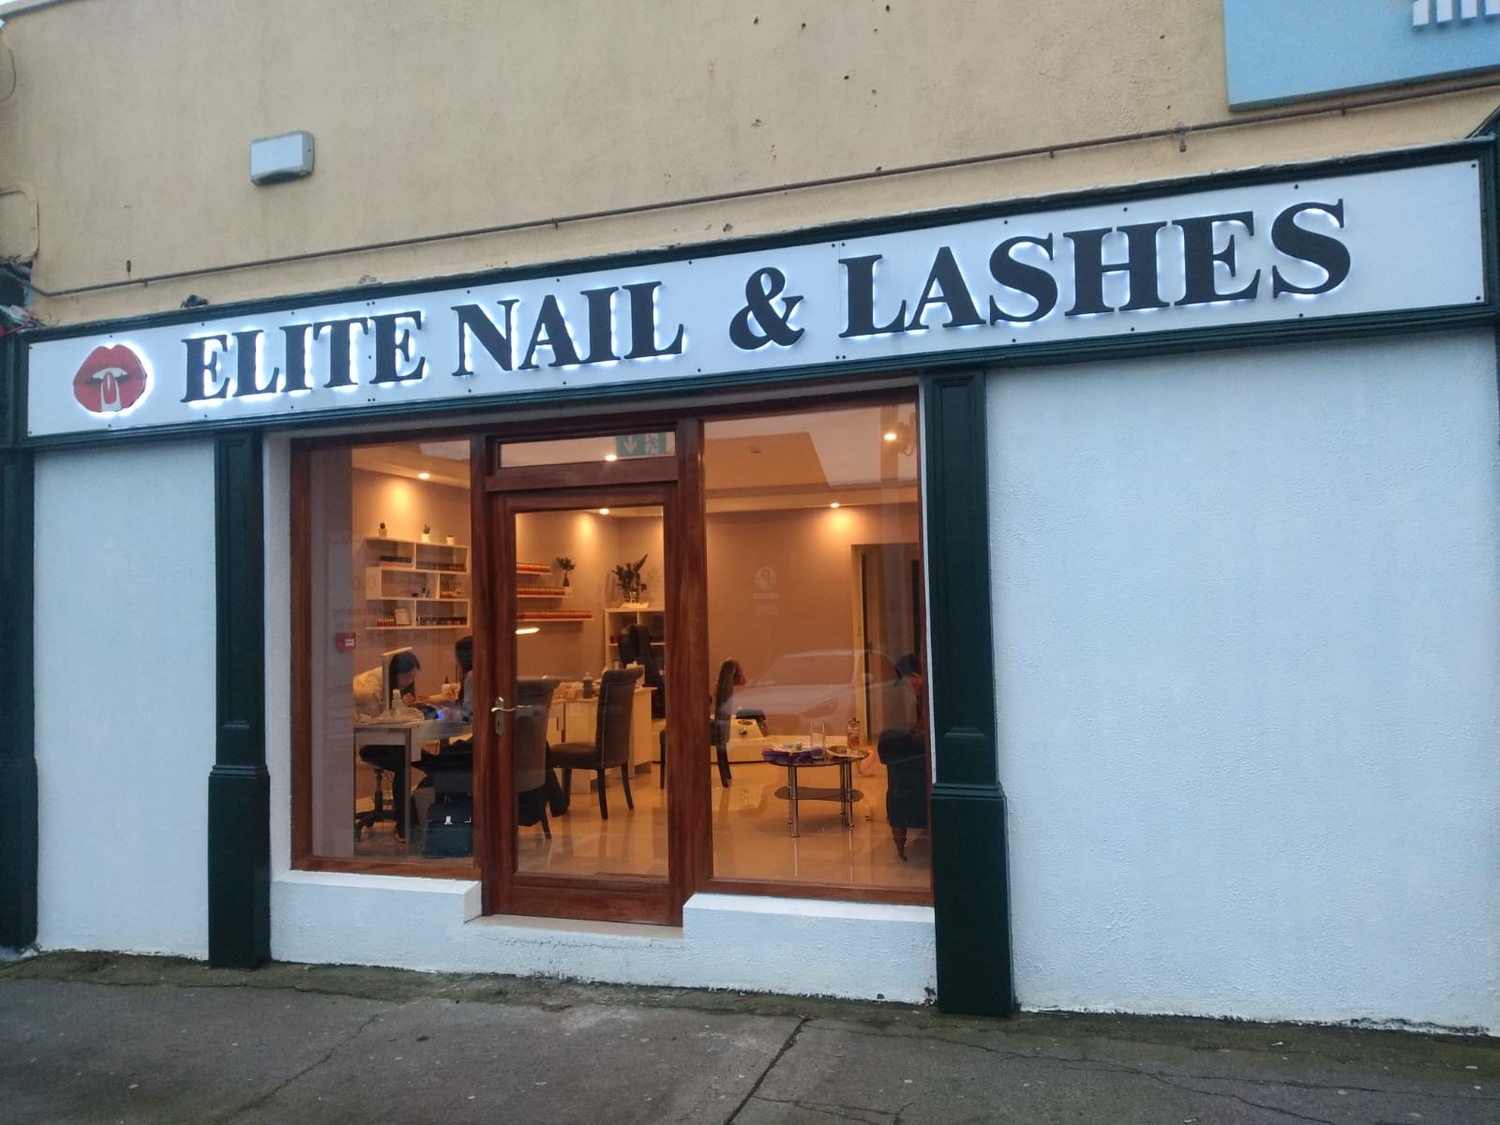 Elite Nail and Lashes Shop Front and Sign